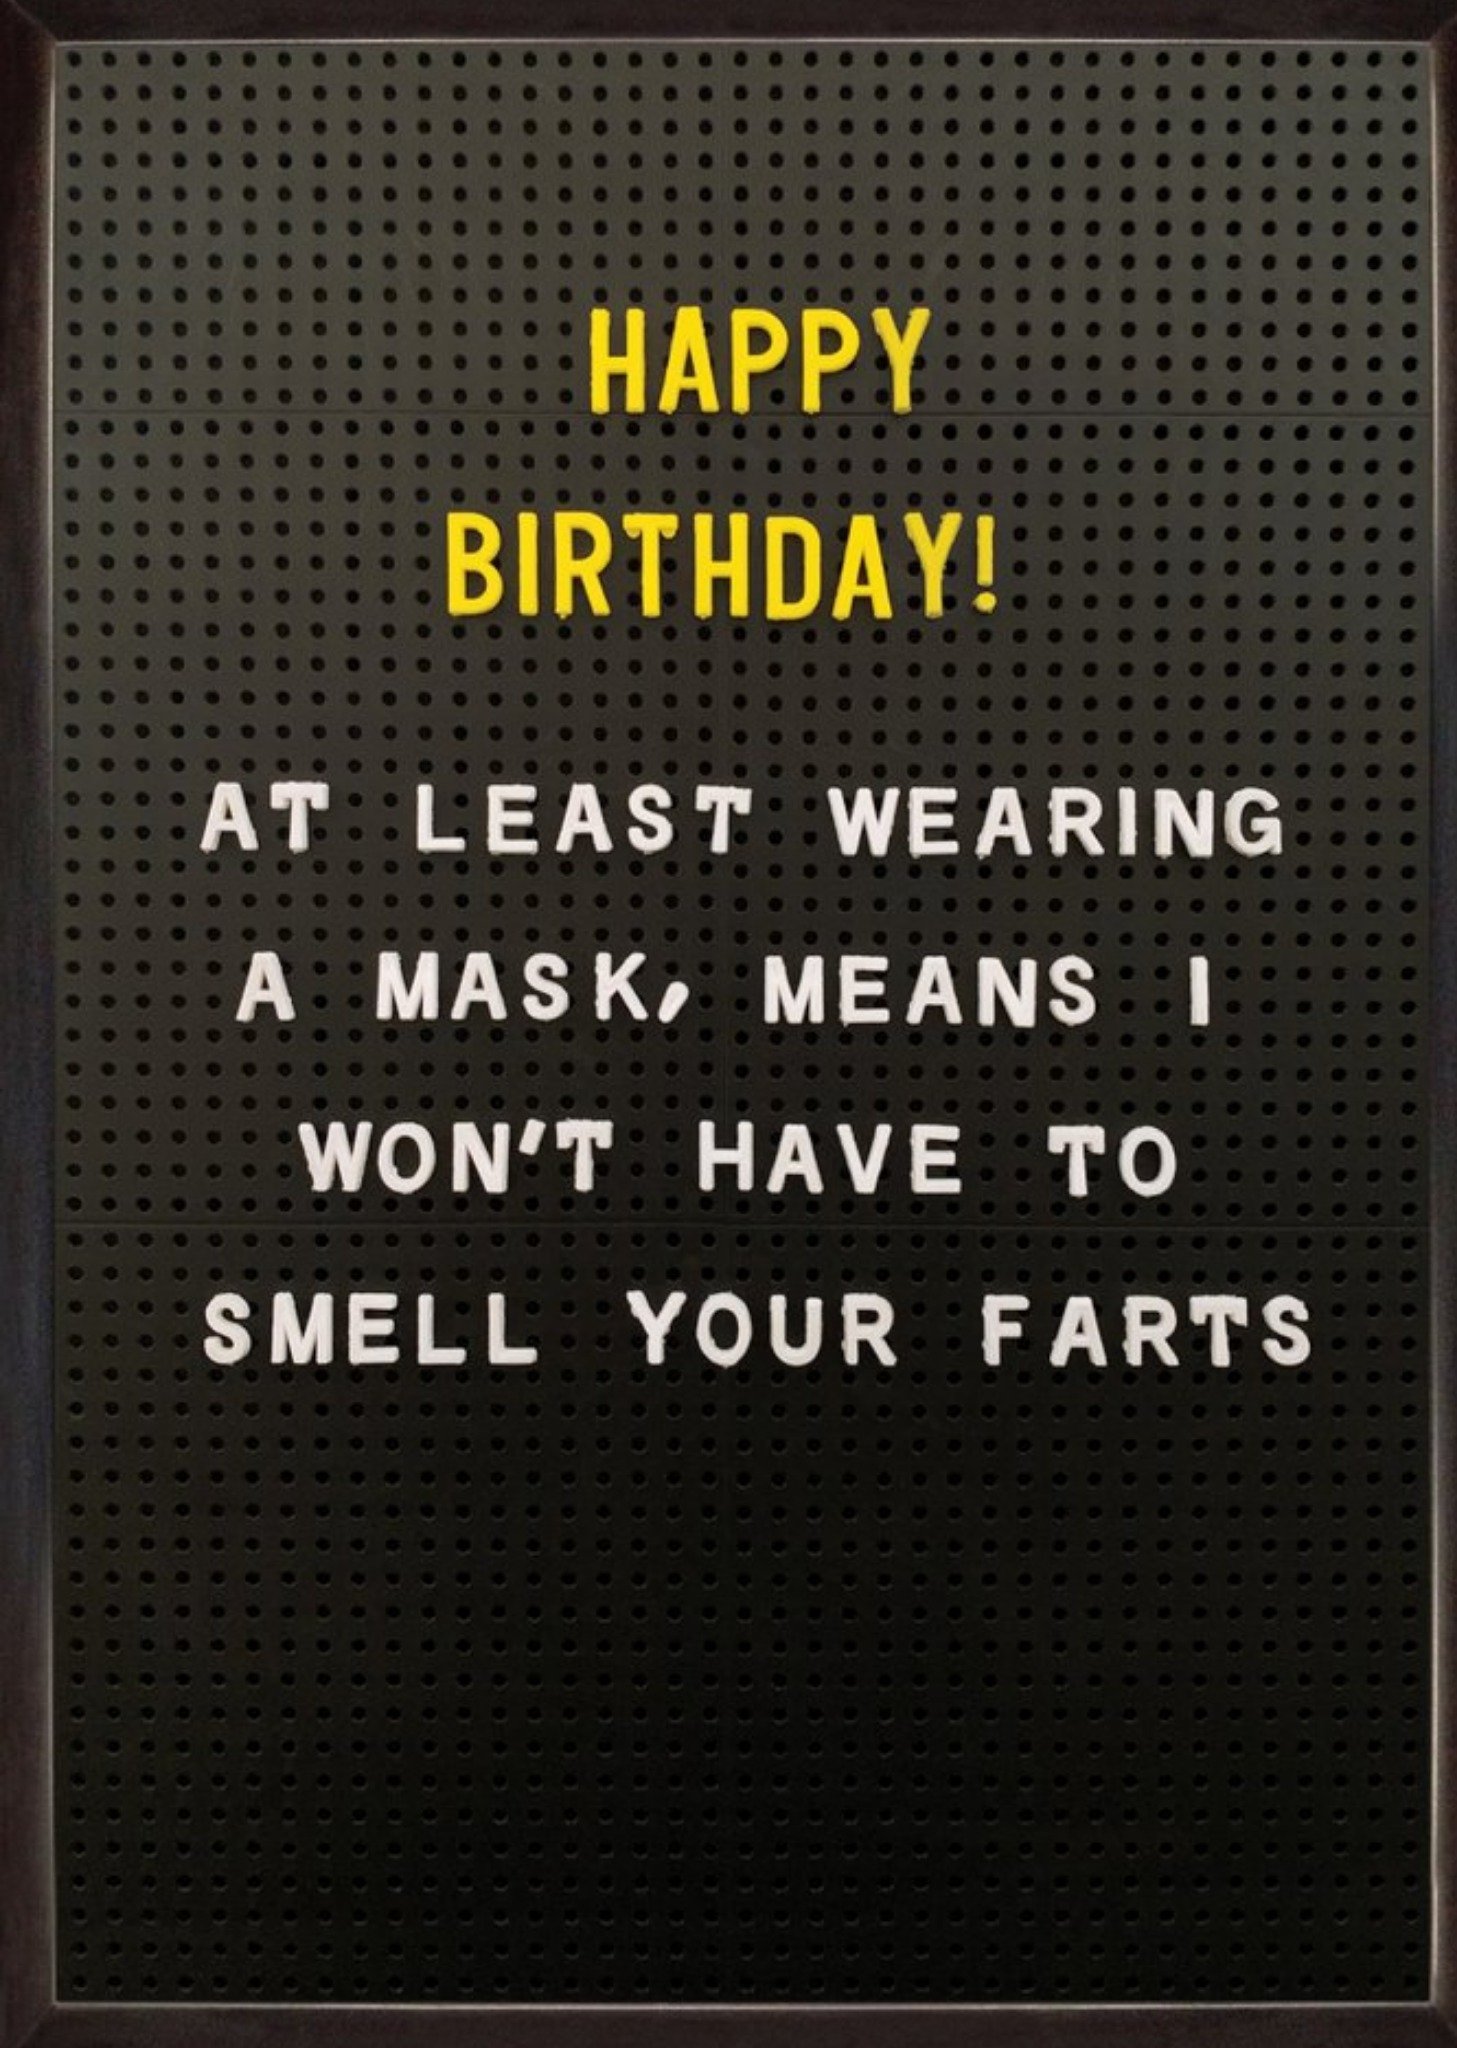 Brainbox Candy Wearing A Mask Birthday Card, Large